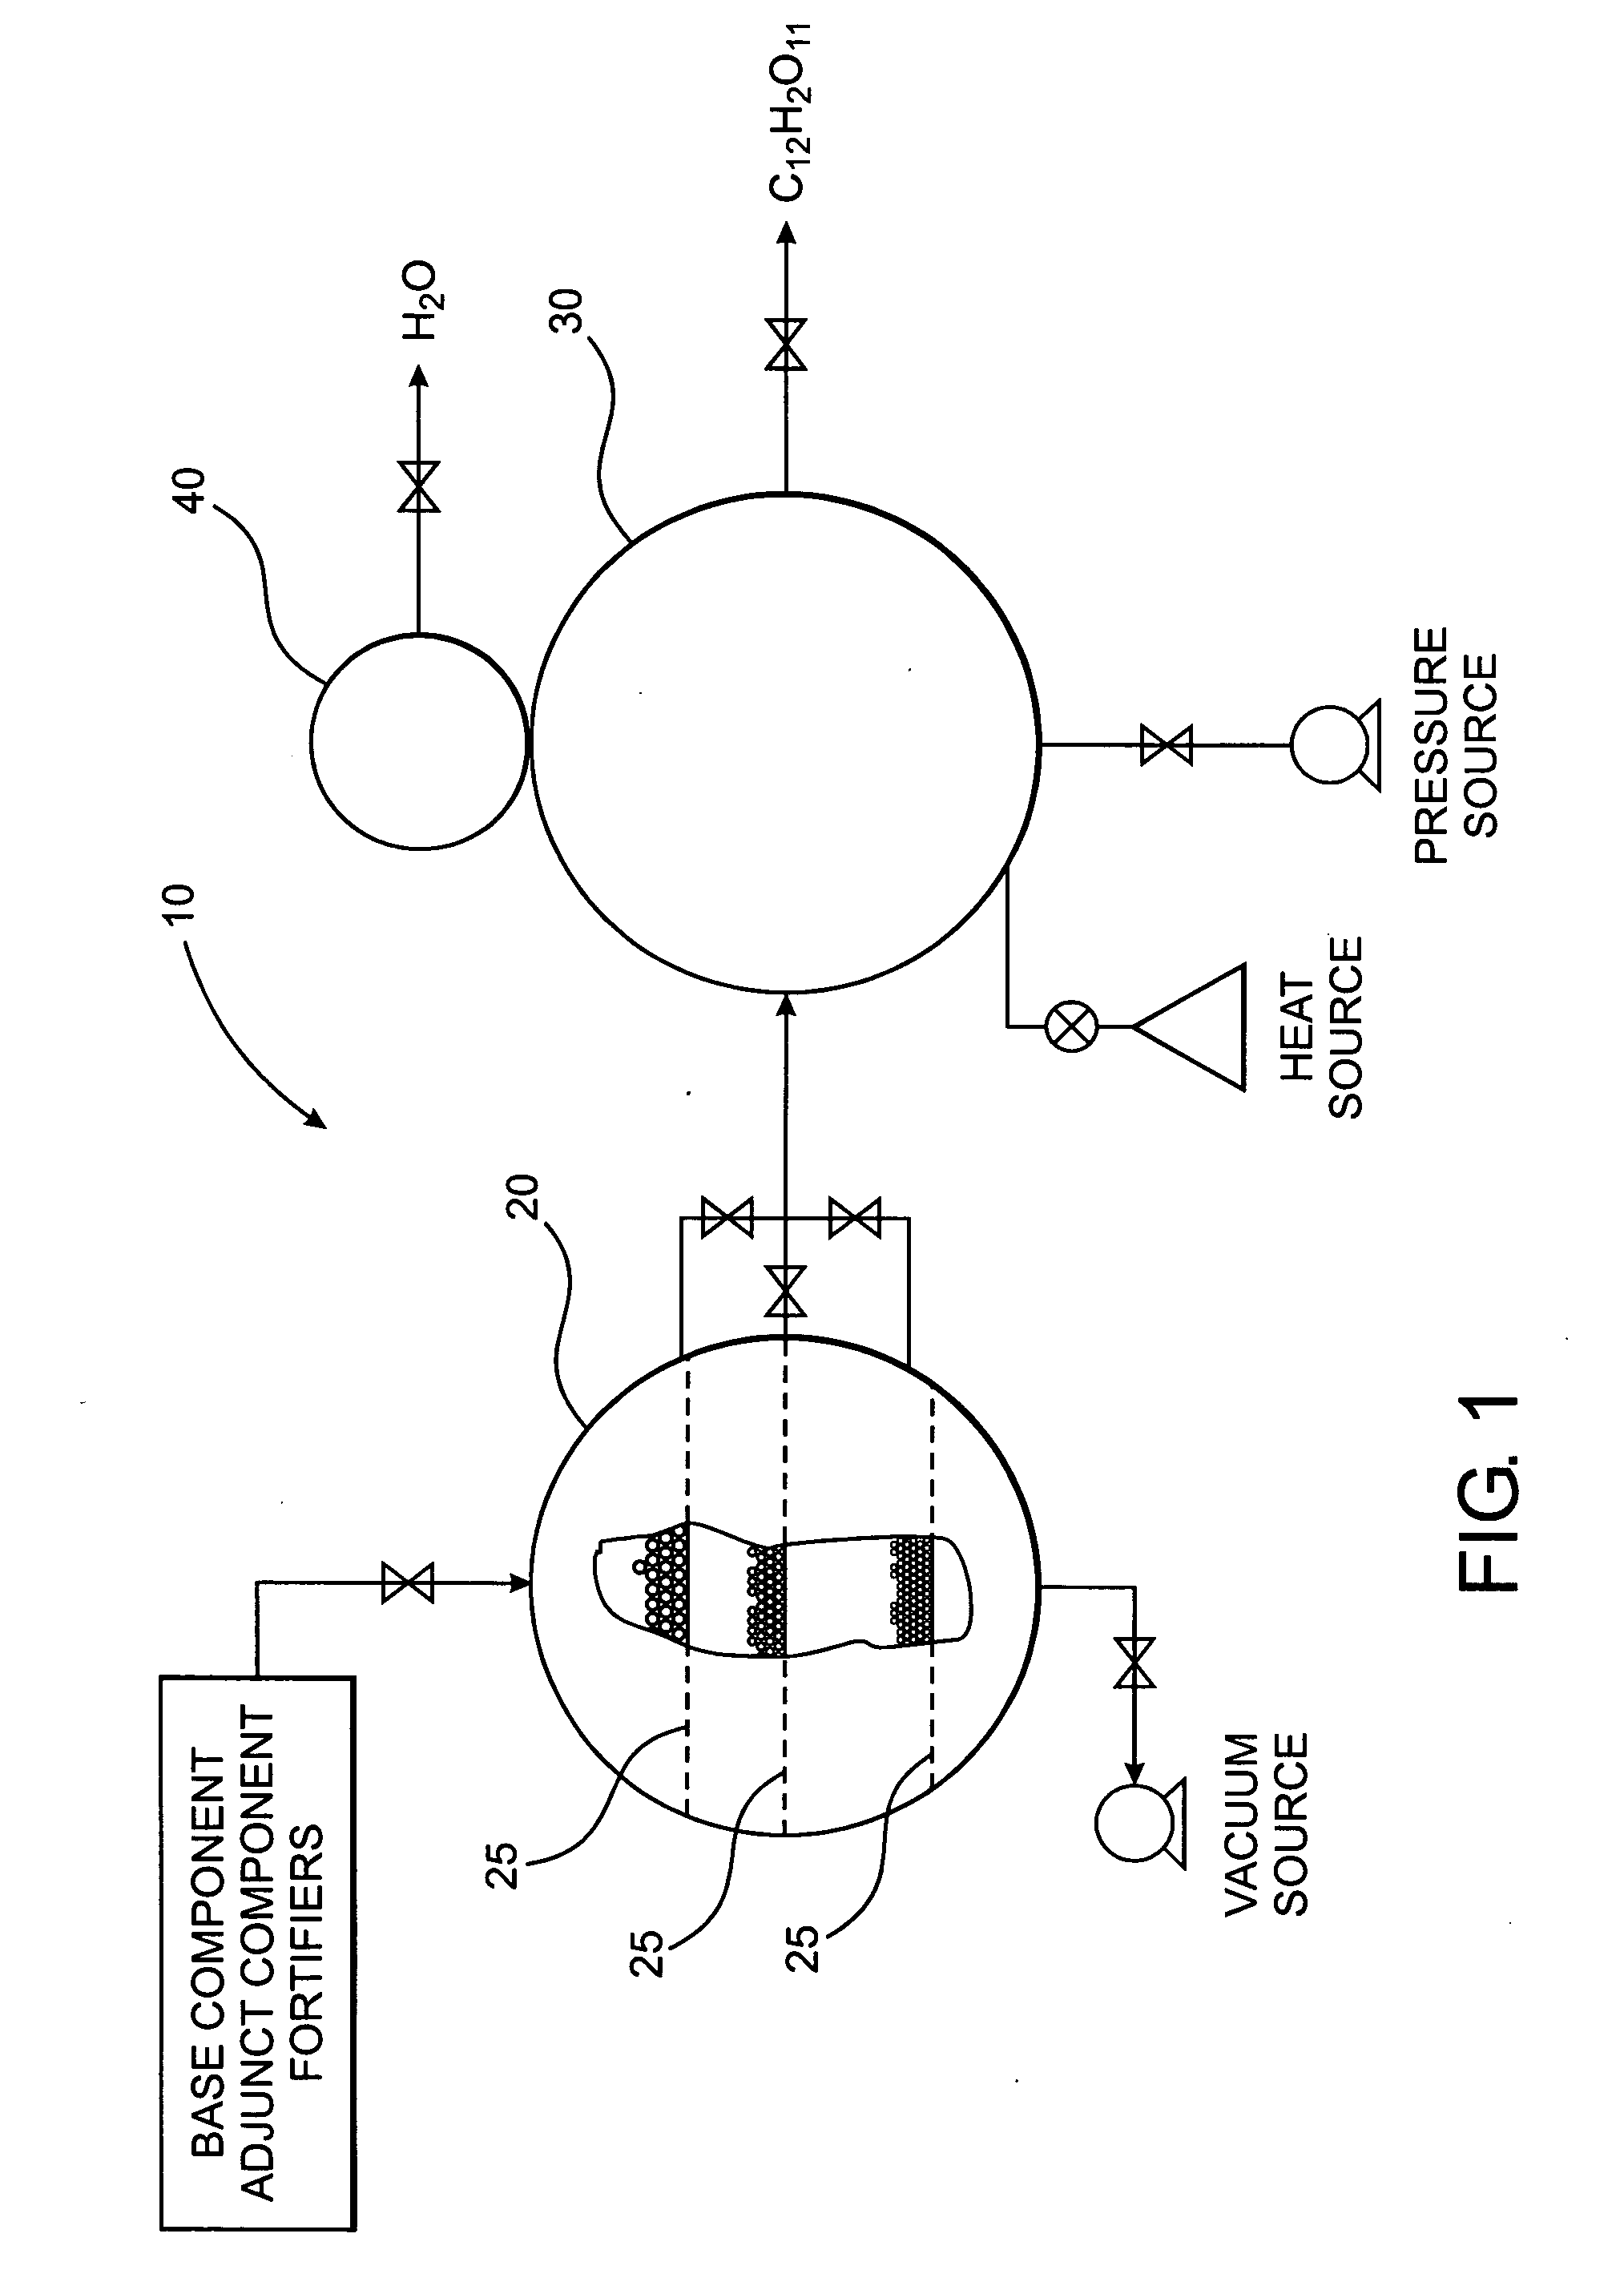 Process for manufacturing a polysaccharide sweetener compound